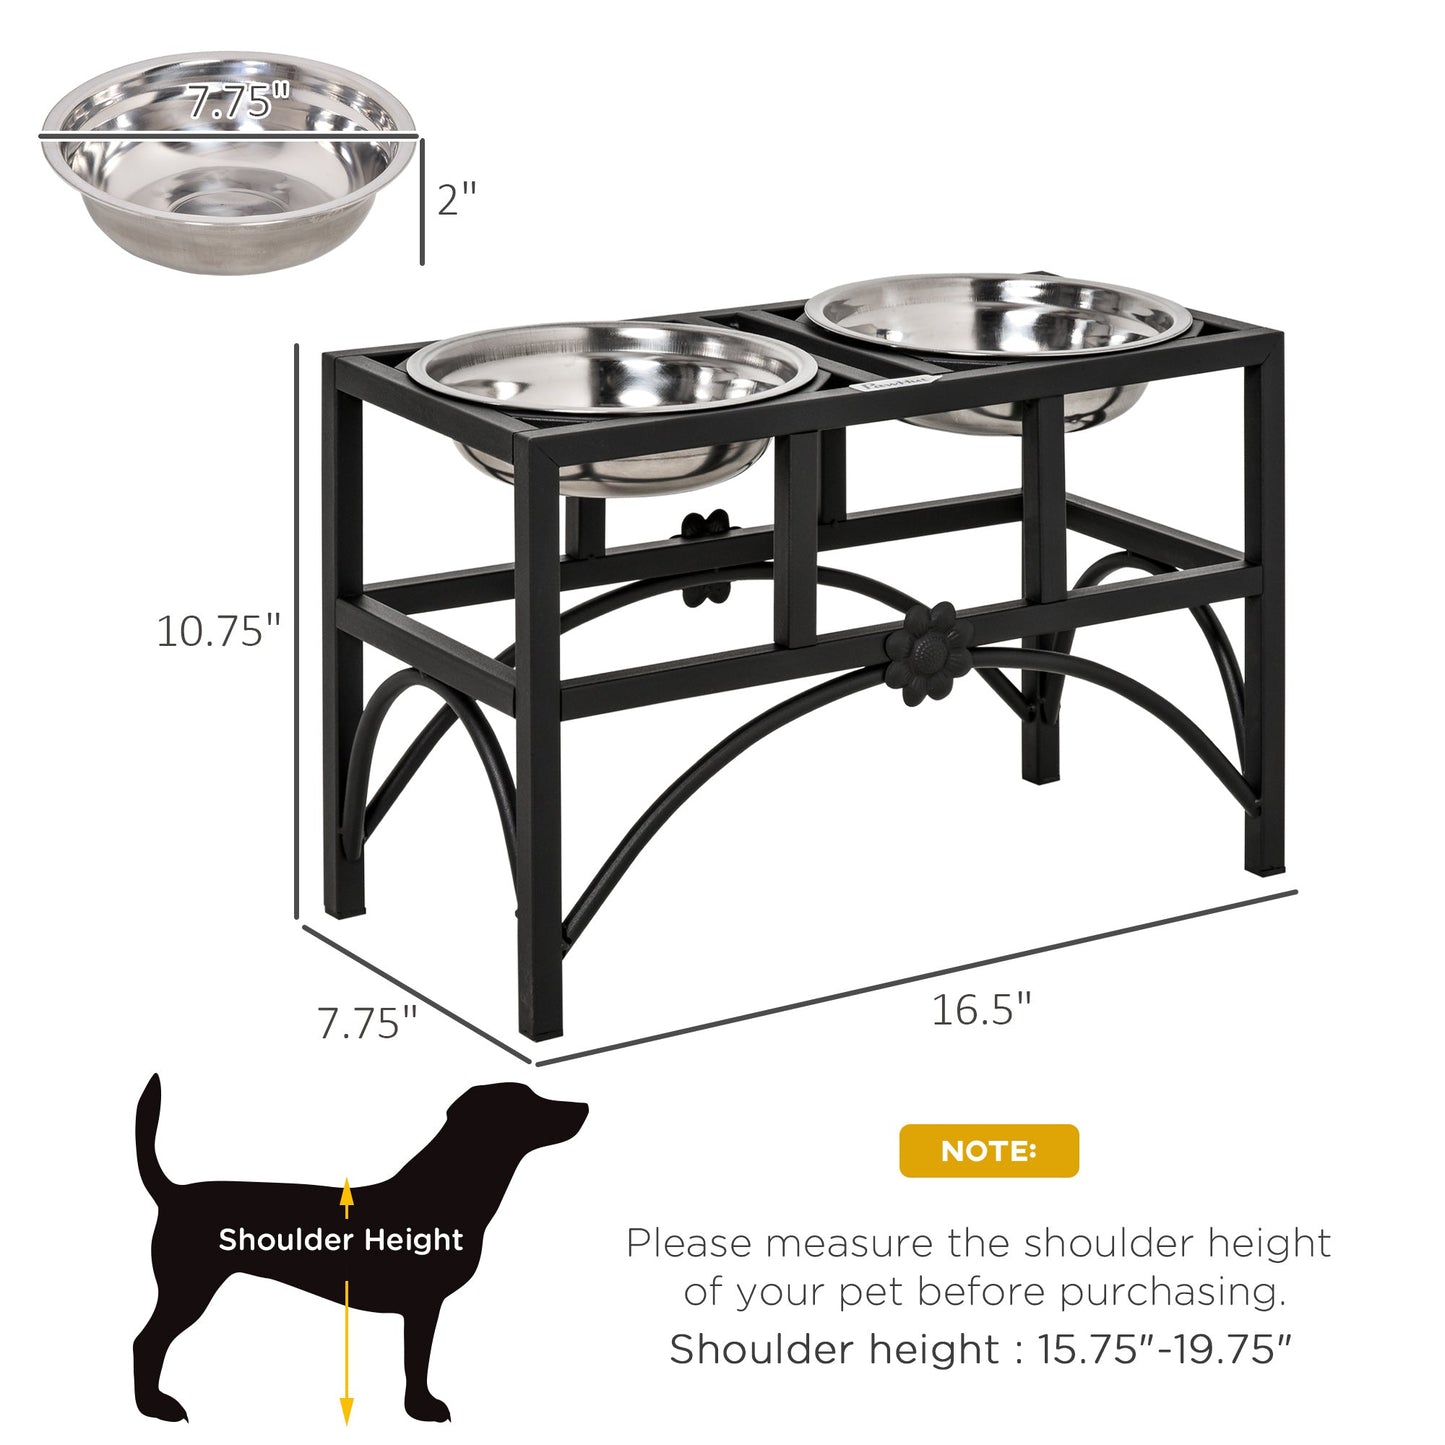 Pet Supplies-17" Double Stainless Steel Heavy Duty Elevated Dog Bowl Dog Feeding Station - Outdoor Style Company